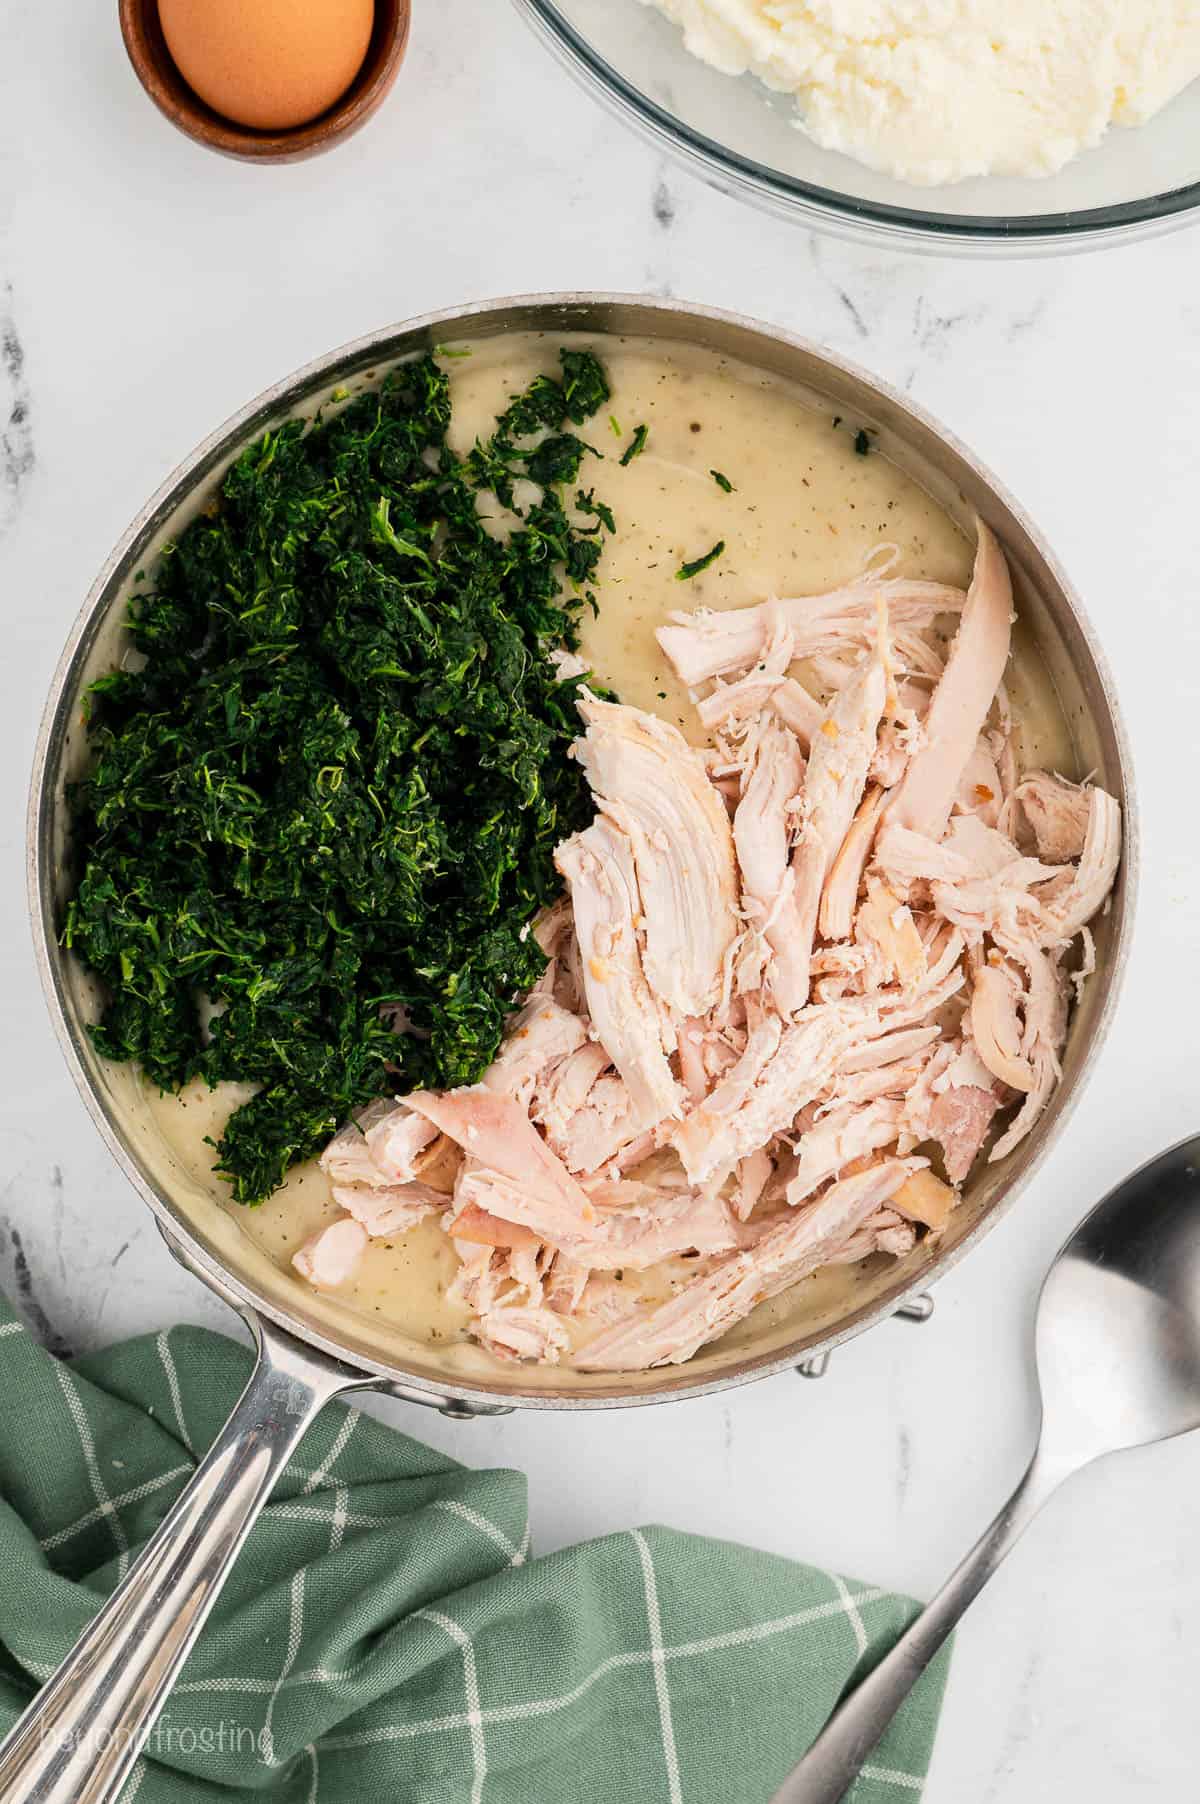 Shredded chicken and spinach added to white sauce in a pan